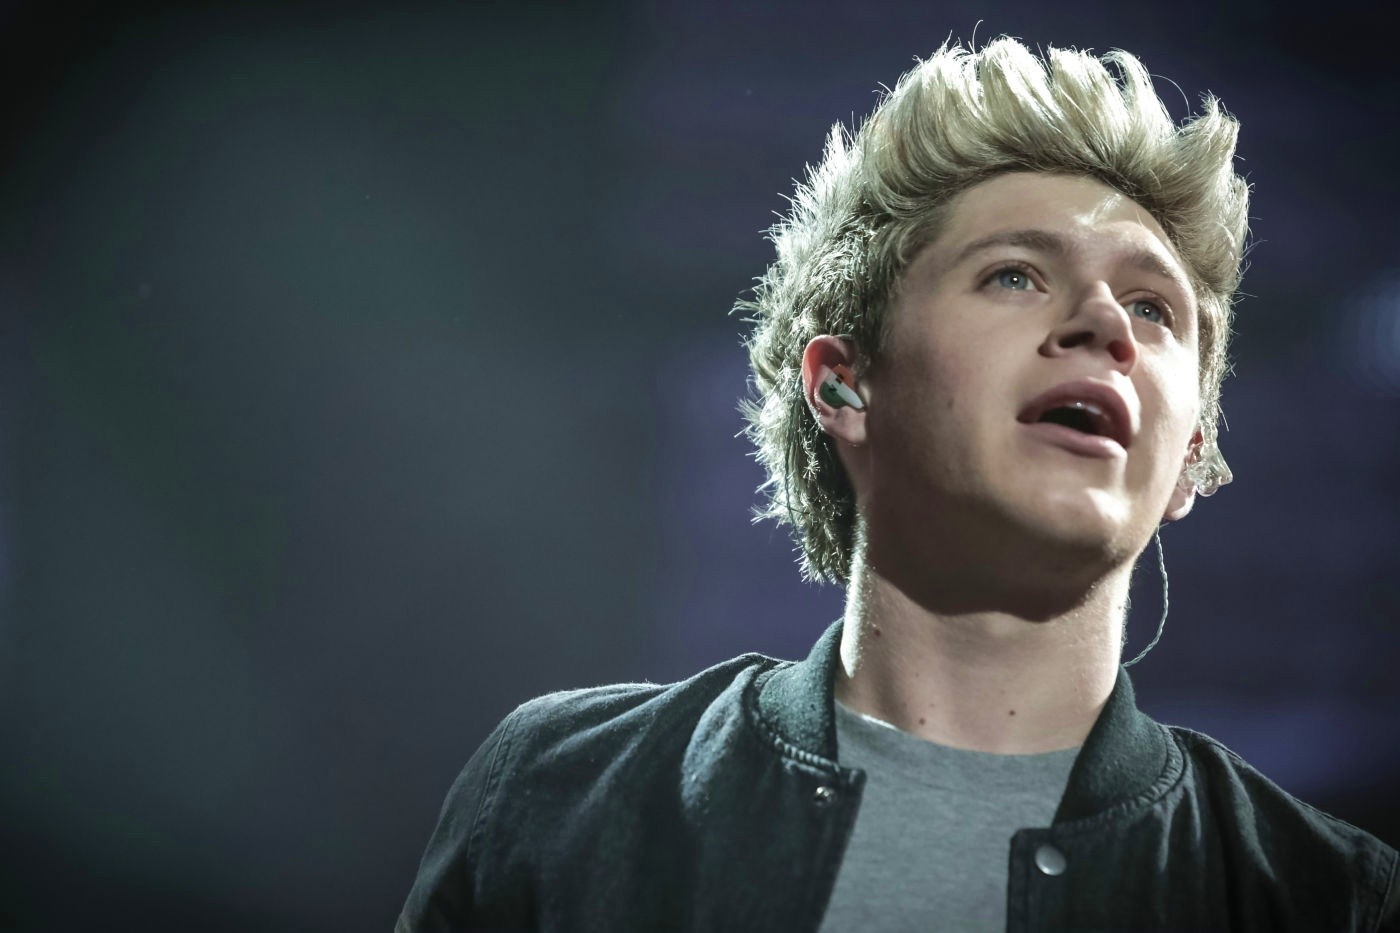 Niall Horan in TriStar Pictures' One Direction: This Is Us (2013)